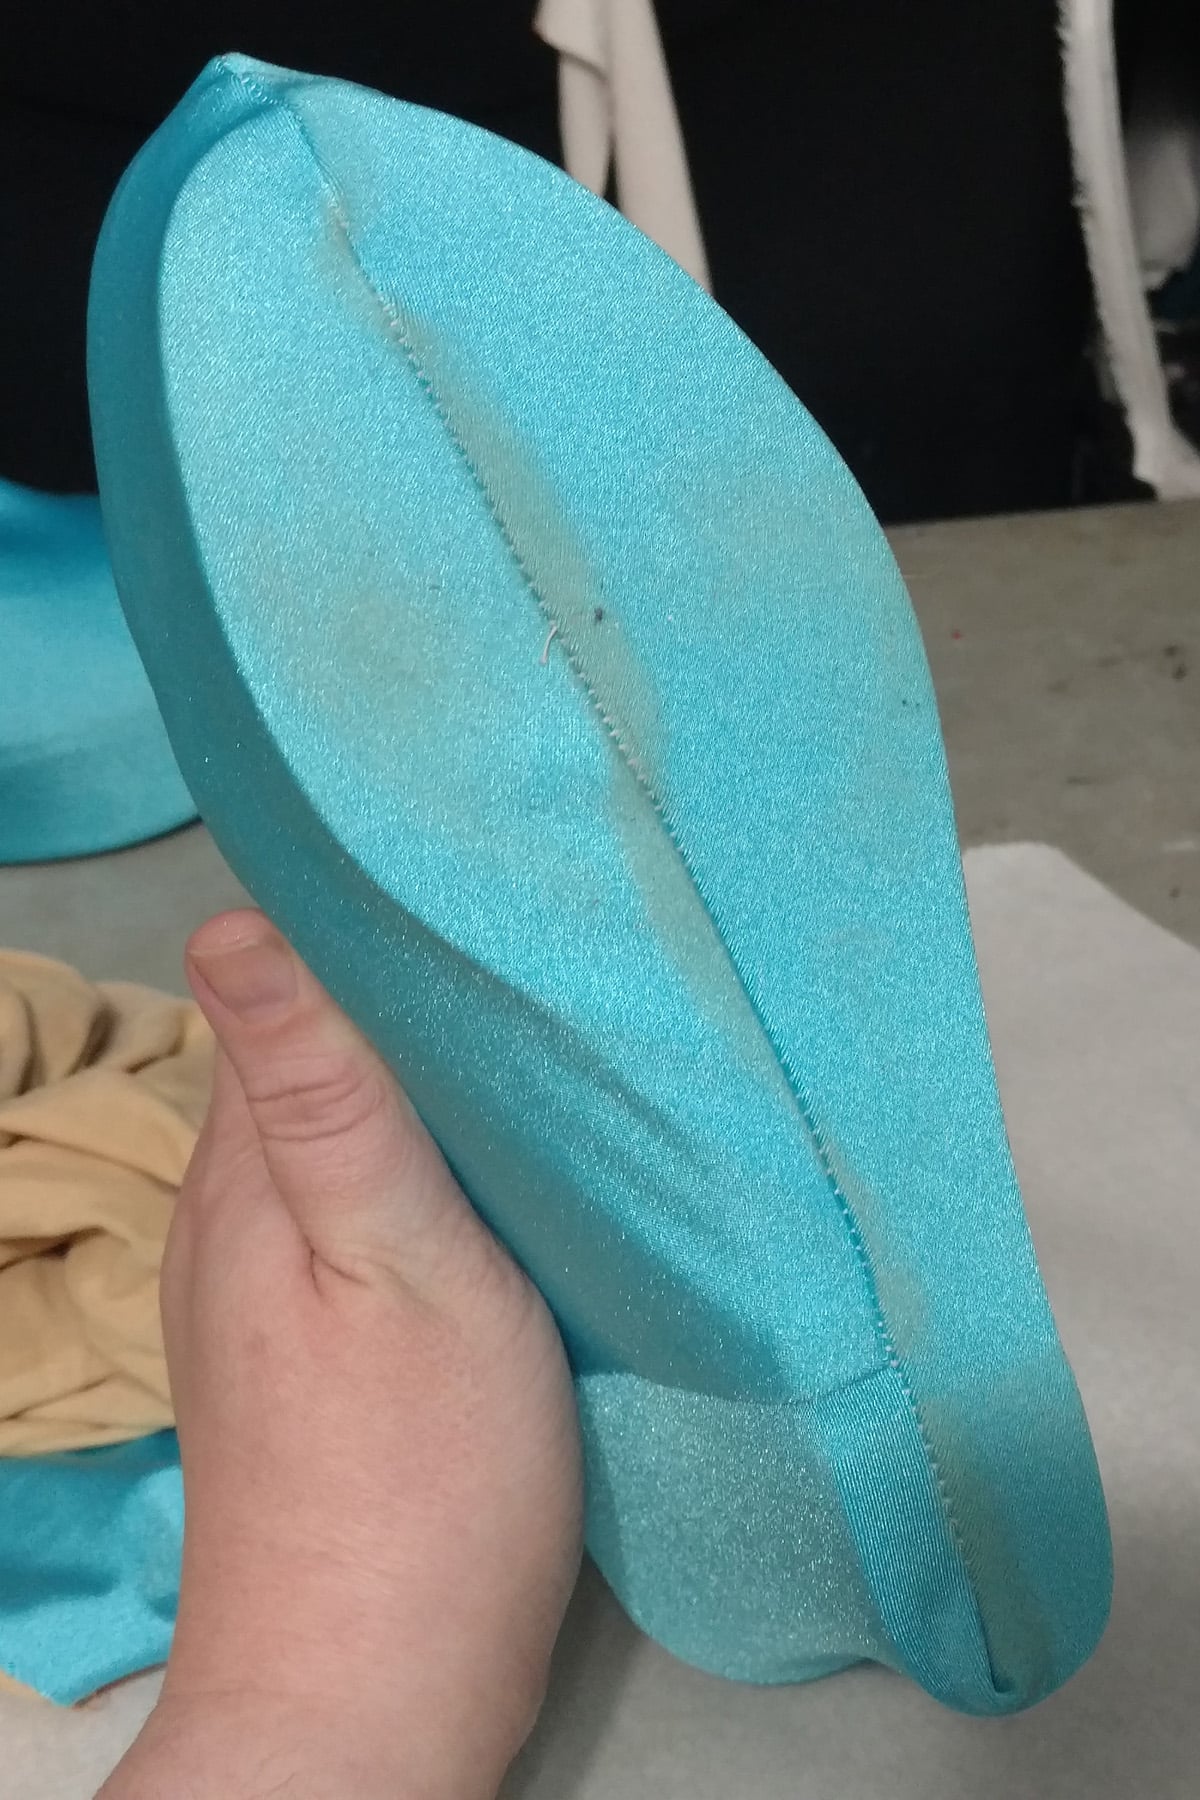 A hand holds up a spandex covered shoe. It's light blue, and showing some signs of dirt/scuffing.